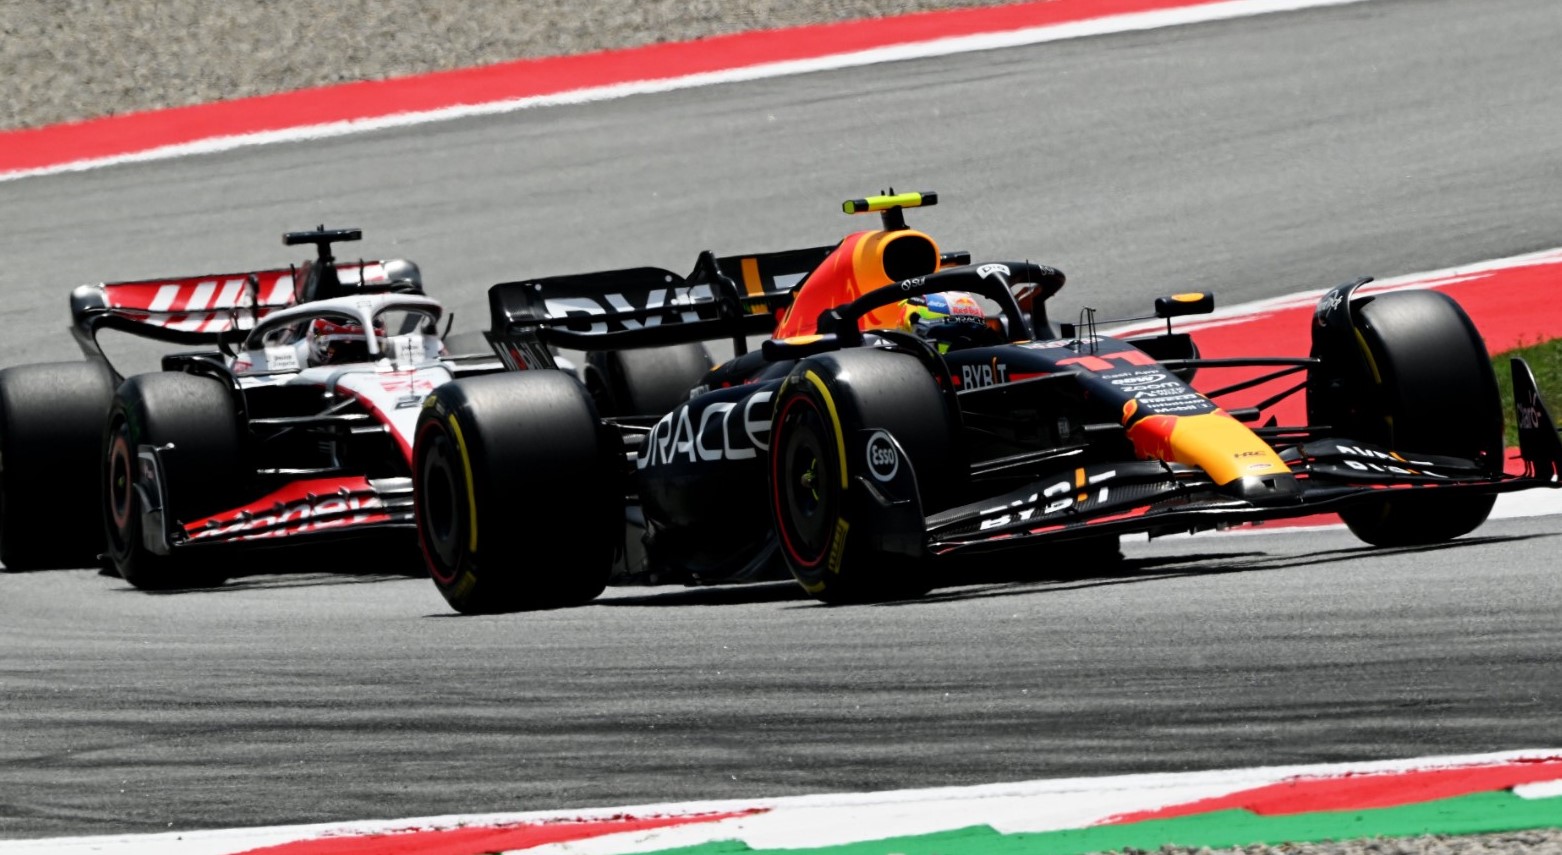 Verstappen tops Spanish Grand Prix FP2 ahead of Alonso and Hulkenberg